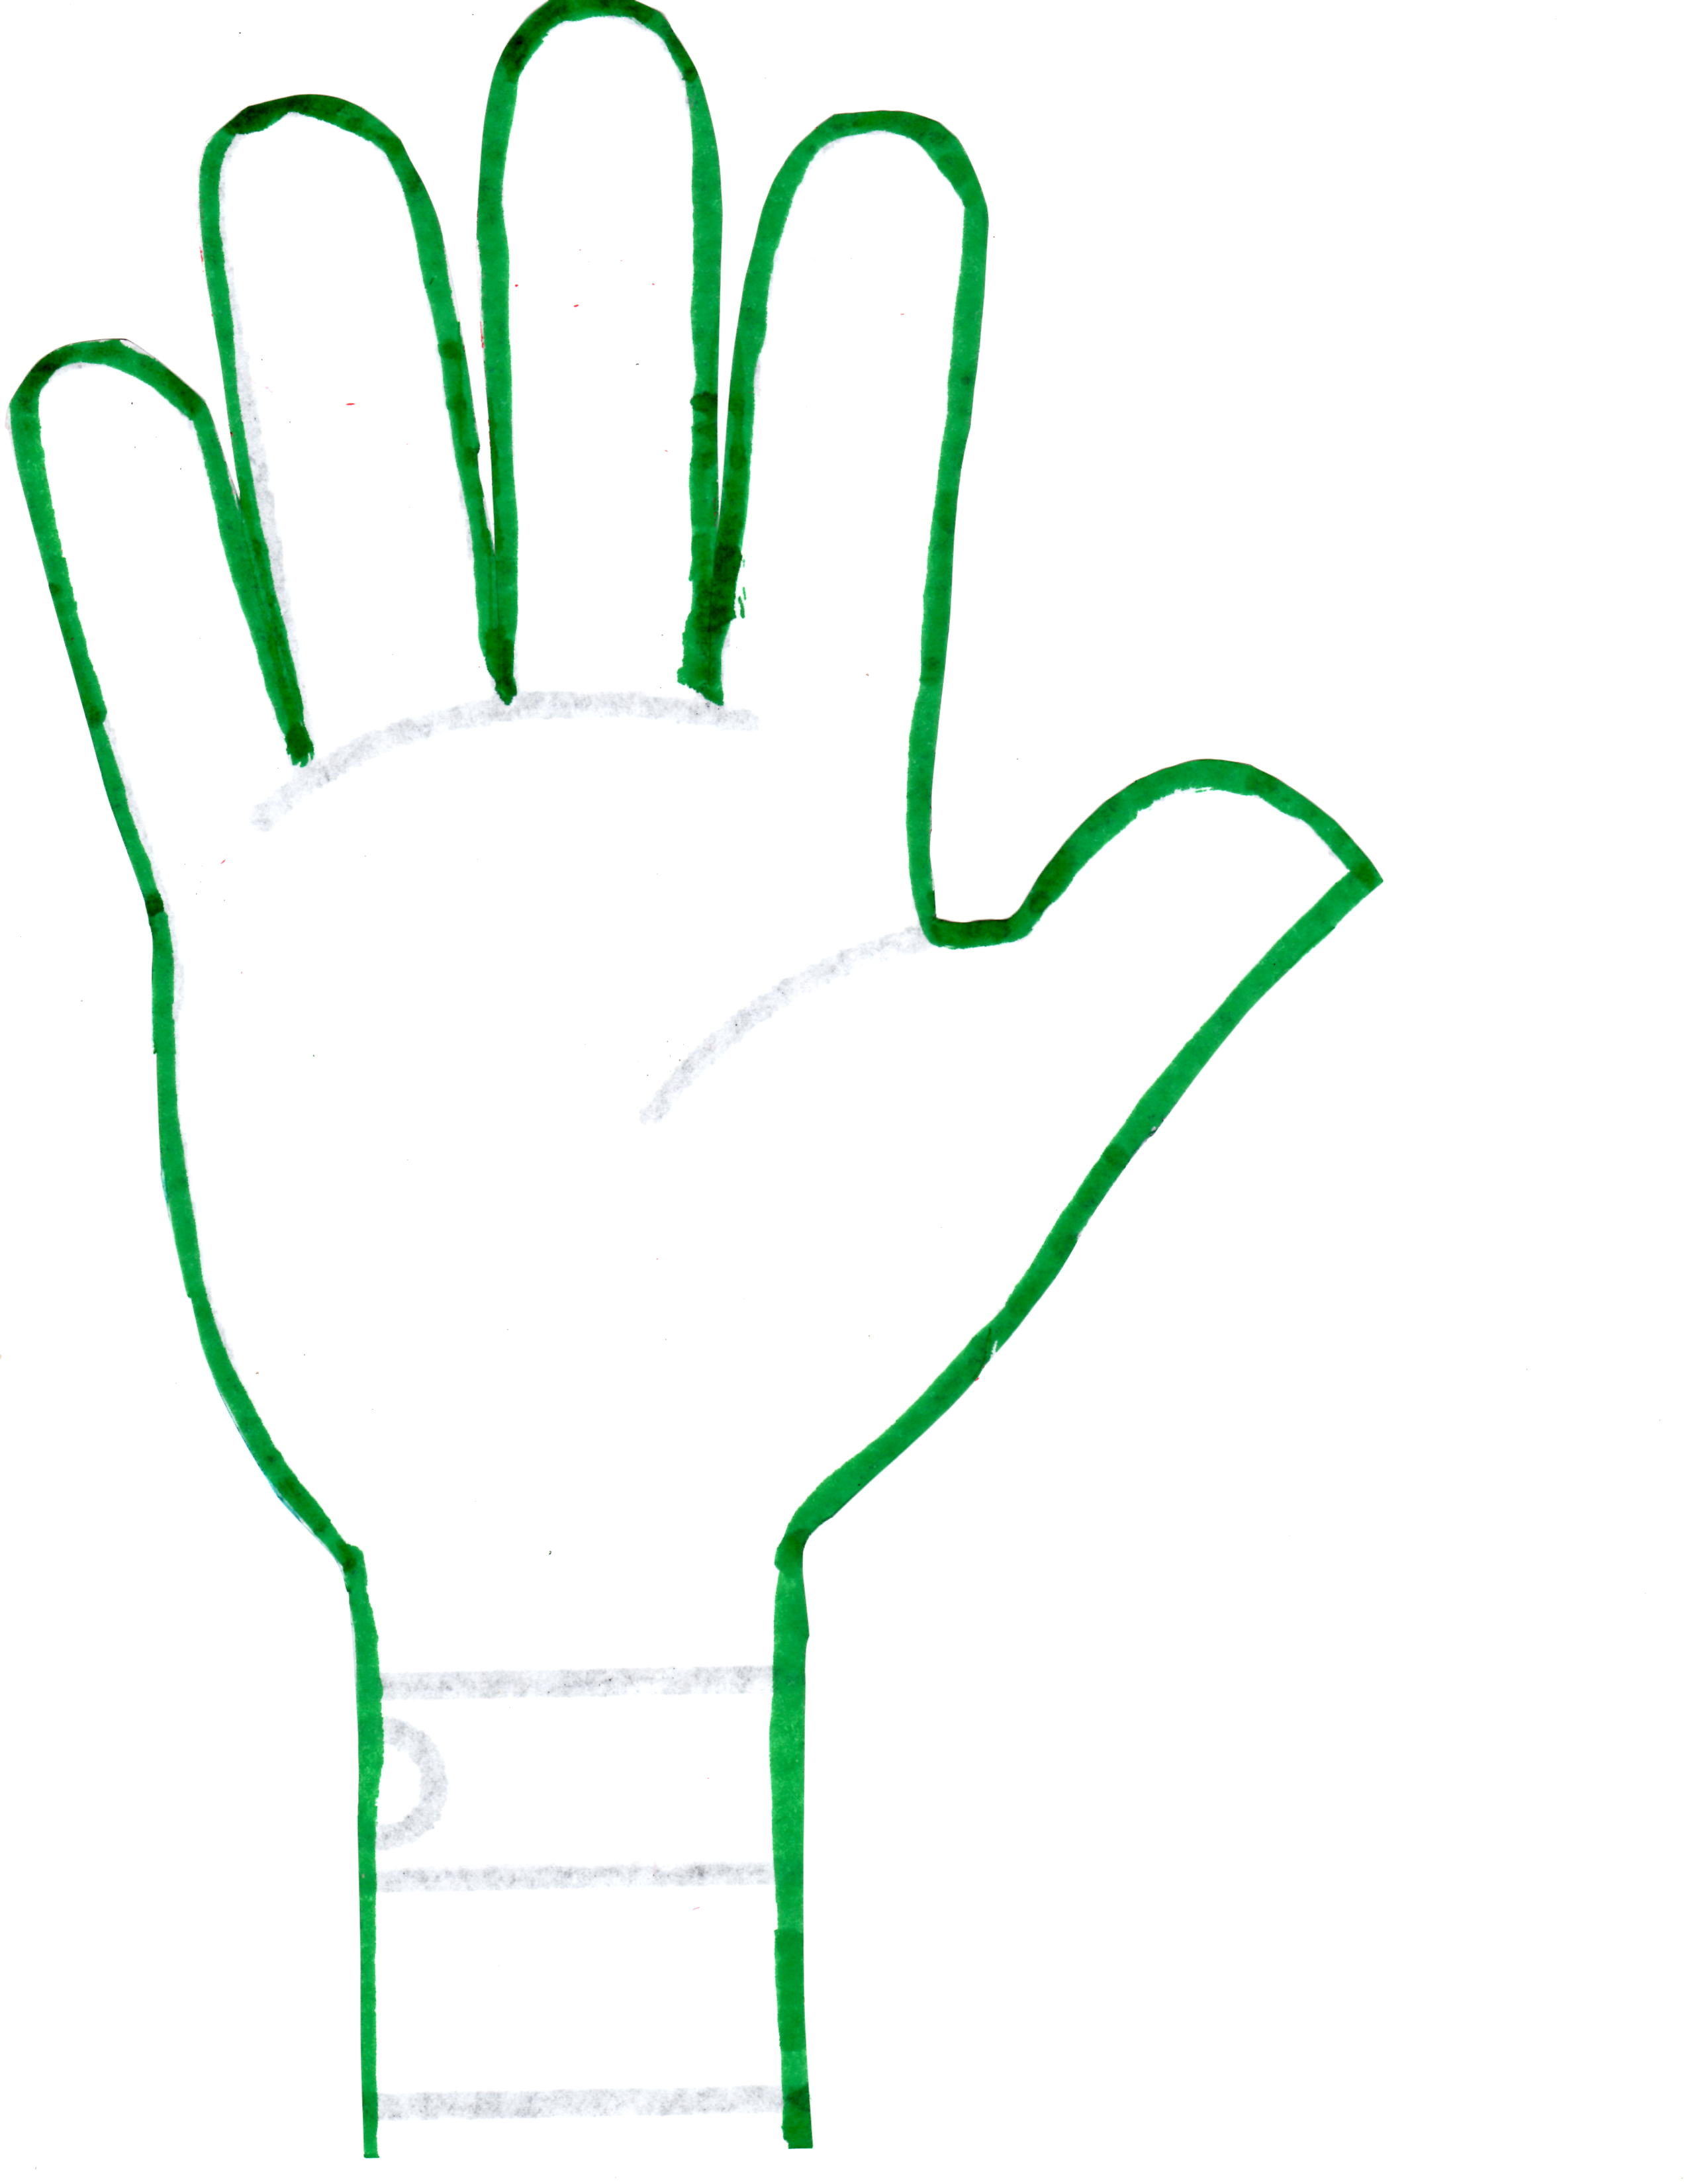 Free Handprint Template, Download Free Handprint Template png images